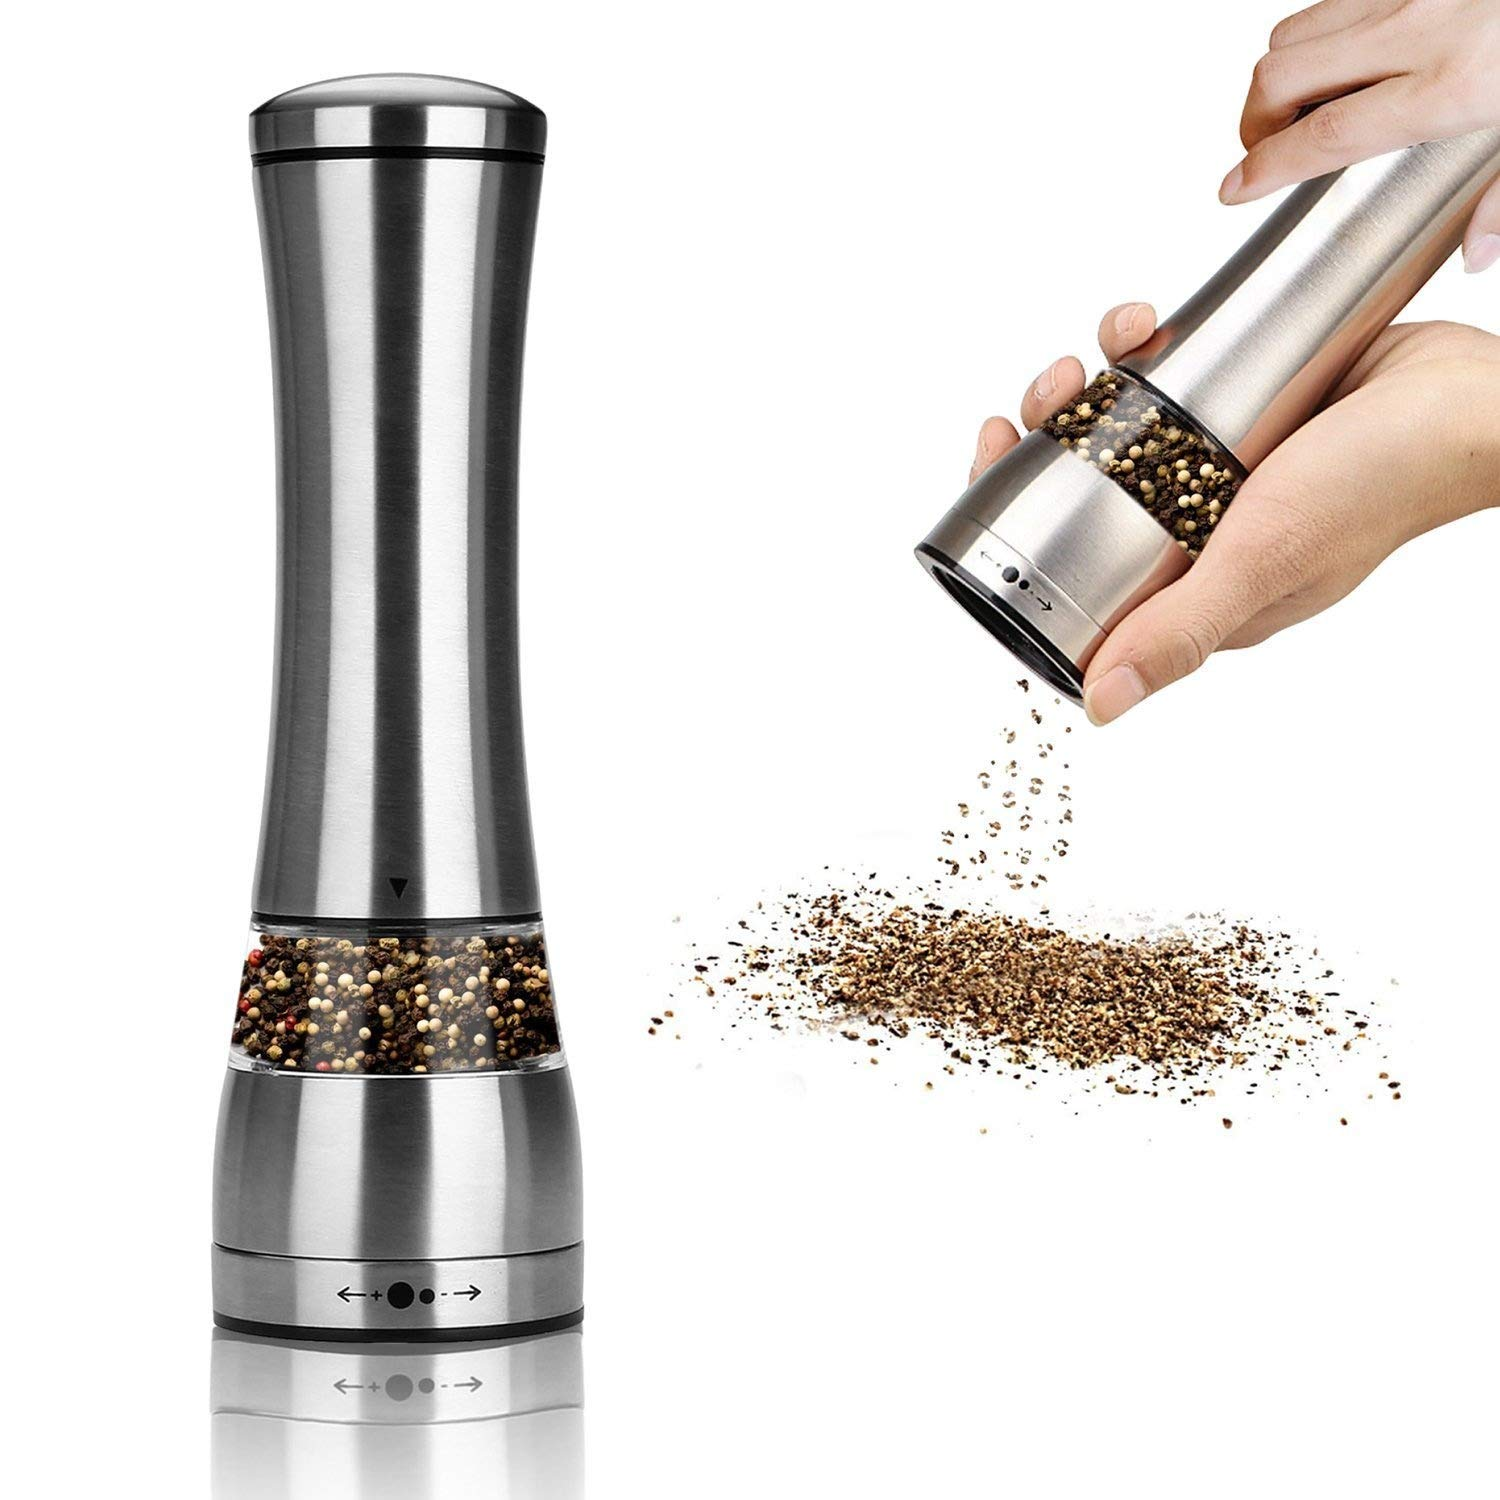 You're going to want to grind those babies out.<br><br>Don't have a grinder for anything that's not drugs? Buy a spice grinder <a href="https://amzn.to/2xXYZQ6" "nofollow" target="_blank">here</a>.